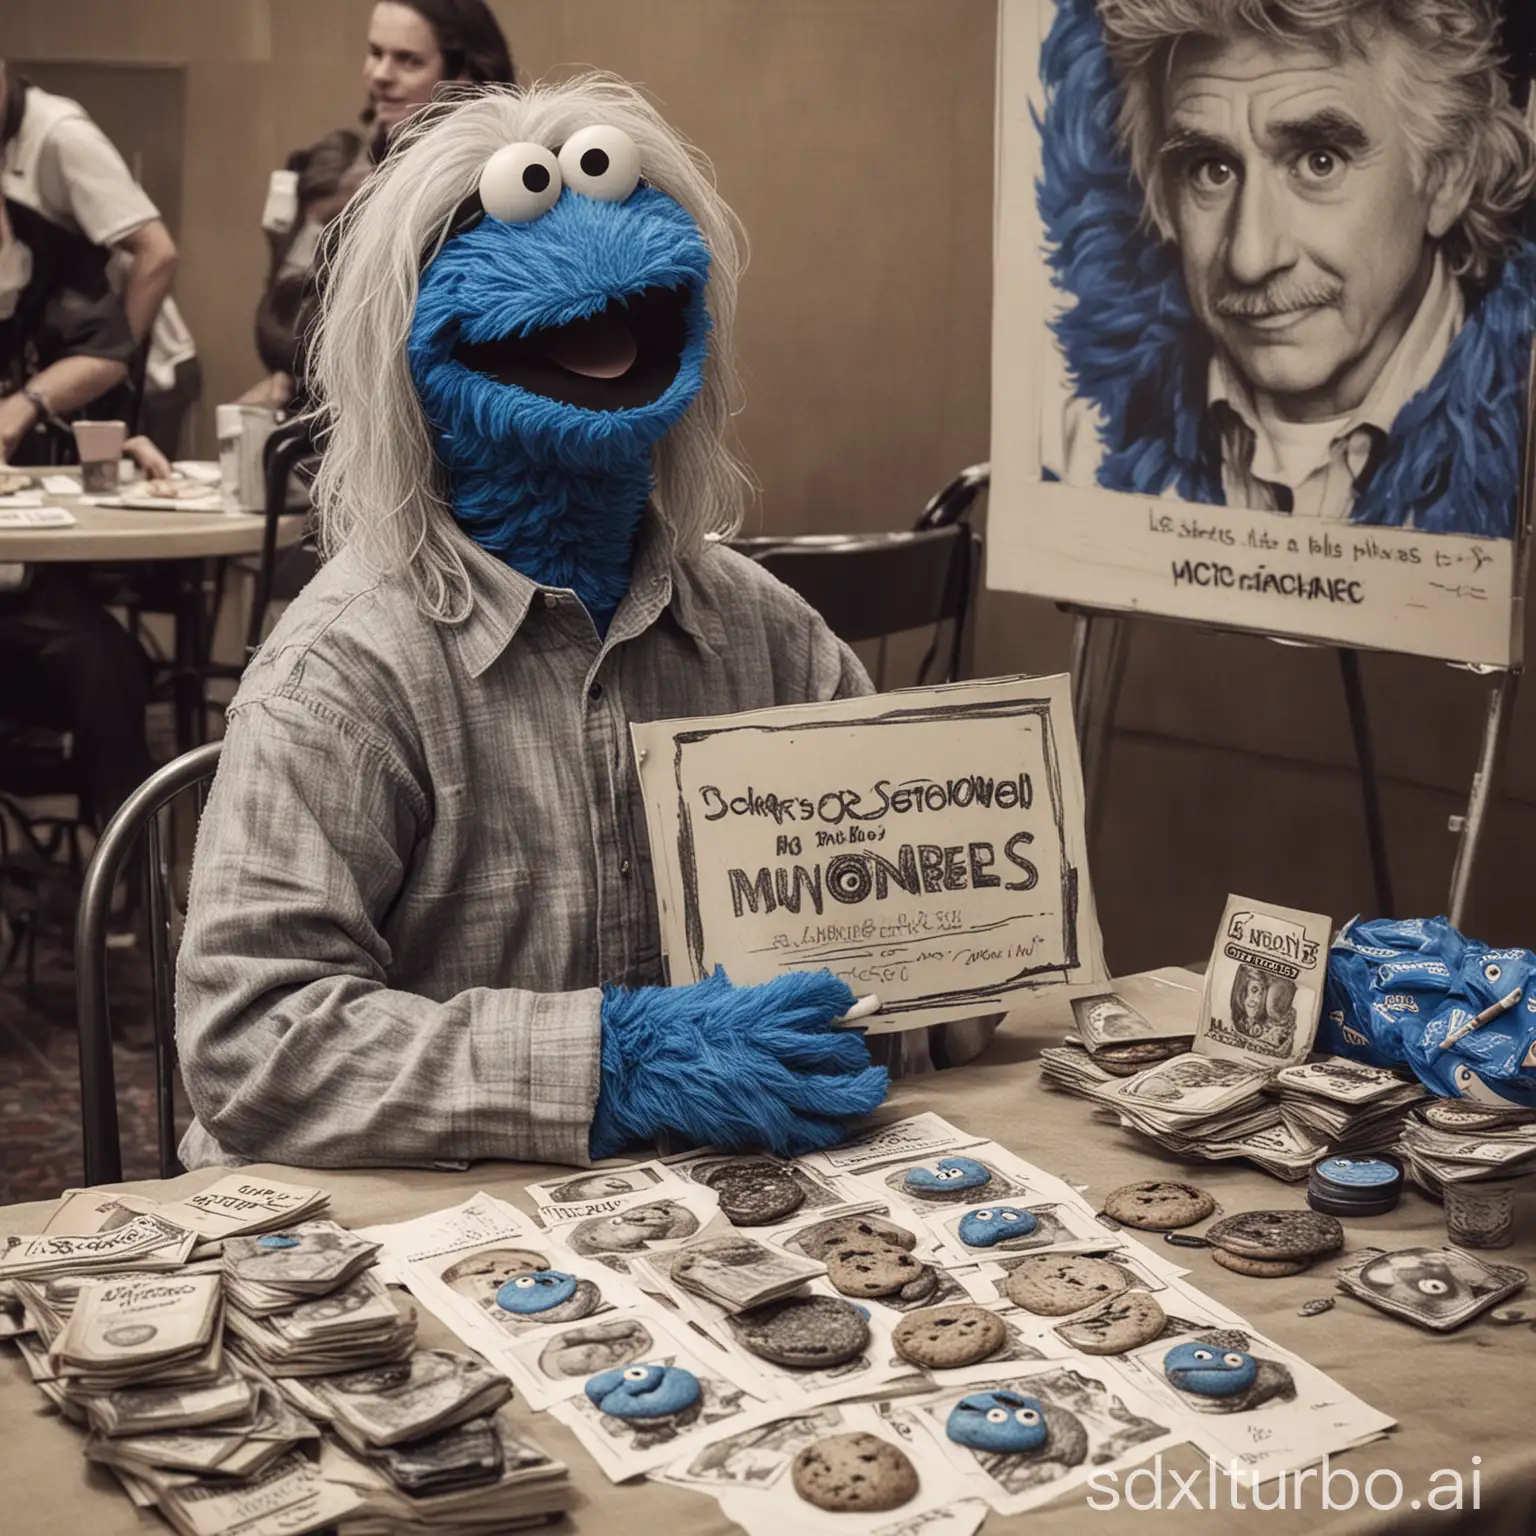 Cookie-Monster-Autograph-Signing-at-Sesame-Street-Convention